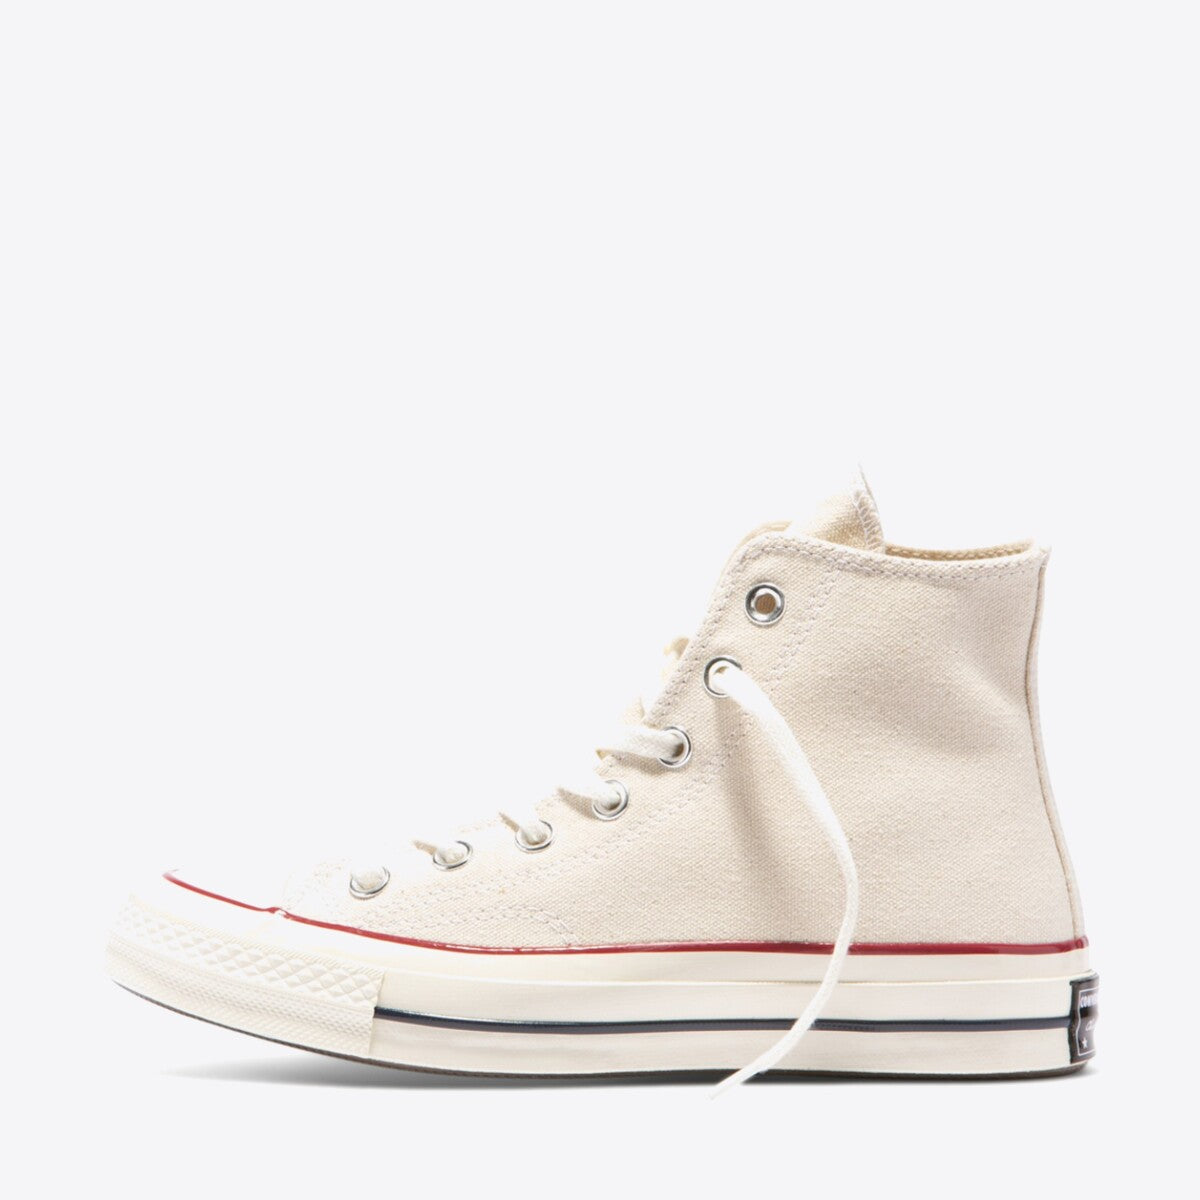 CONVERSE Chuck Taylor All Star 70 Canvas High Parchment - Image 6